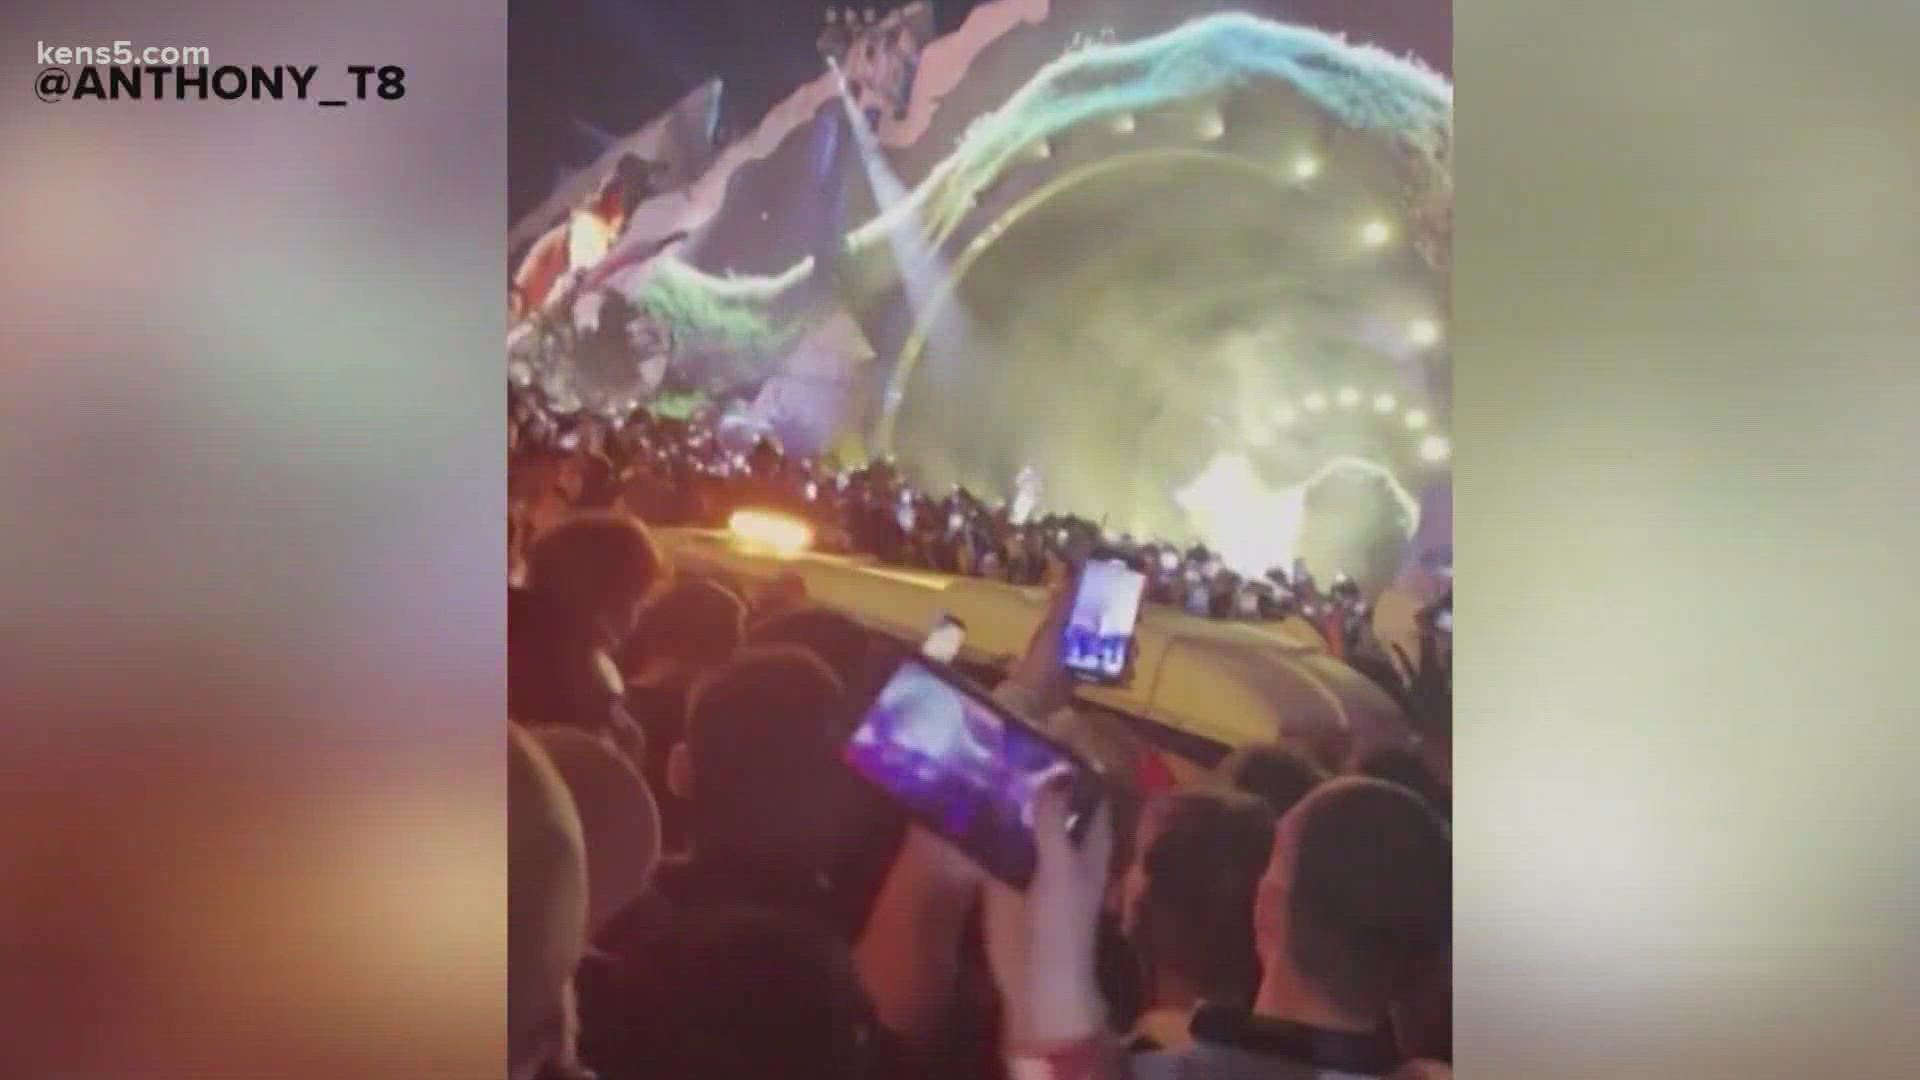 Officials are asking anyone with photos or video from the concert to upload it to the FBI's website.